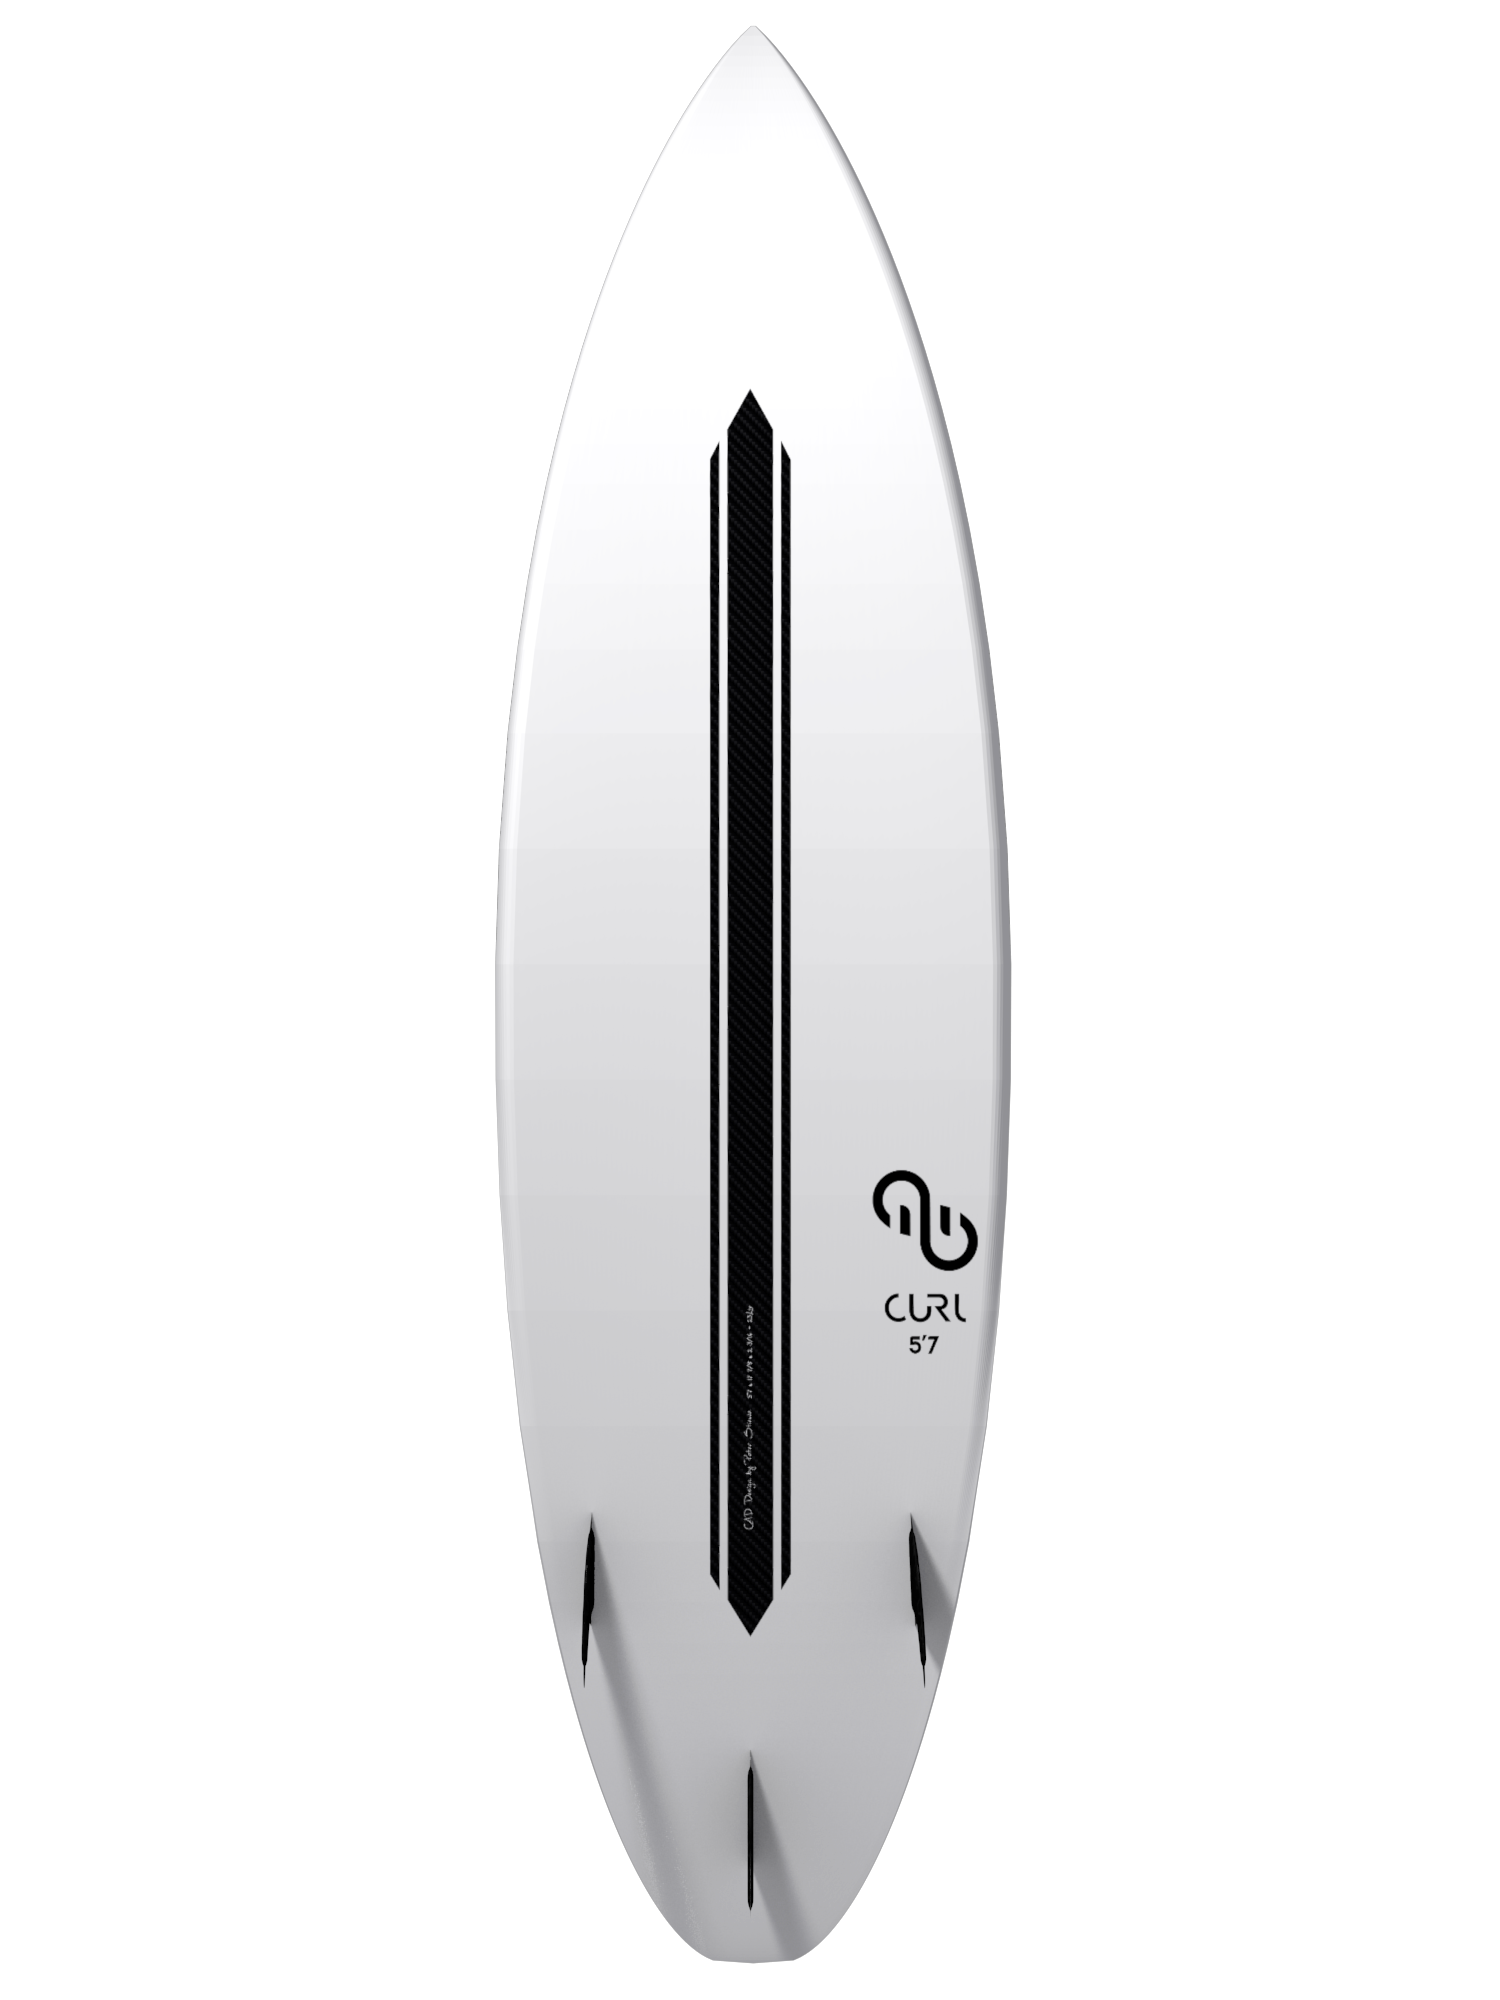 Eleveight Curl Surfboard back